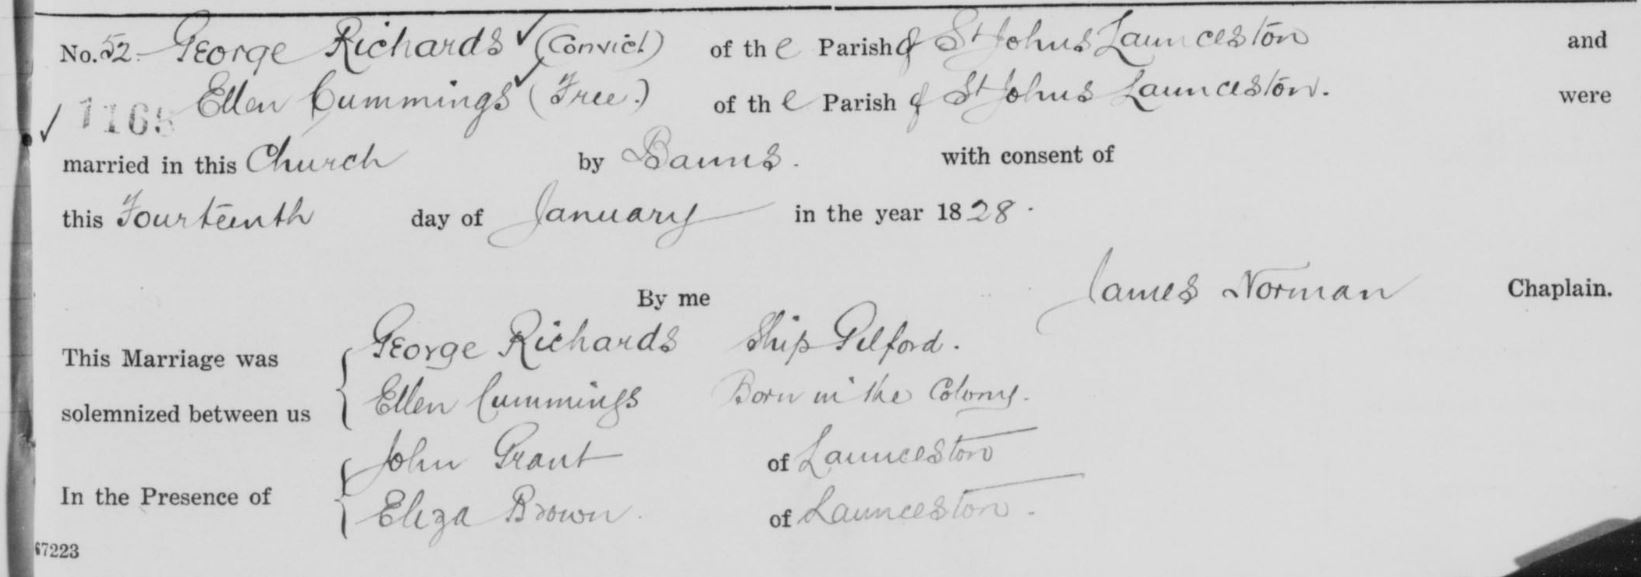 Marriage record of George Richards and Ellen Cummings